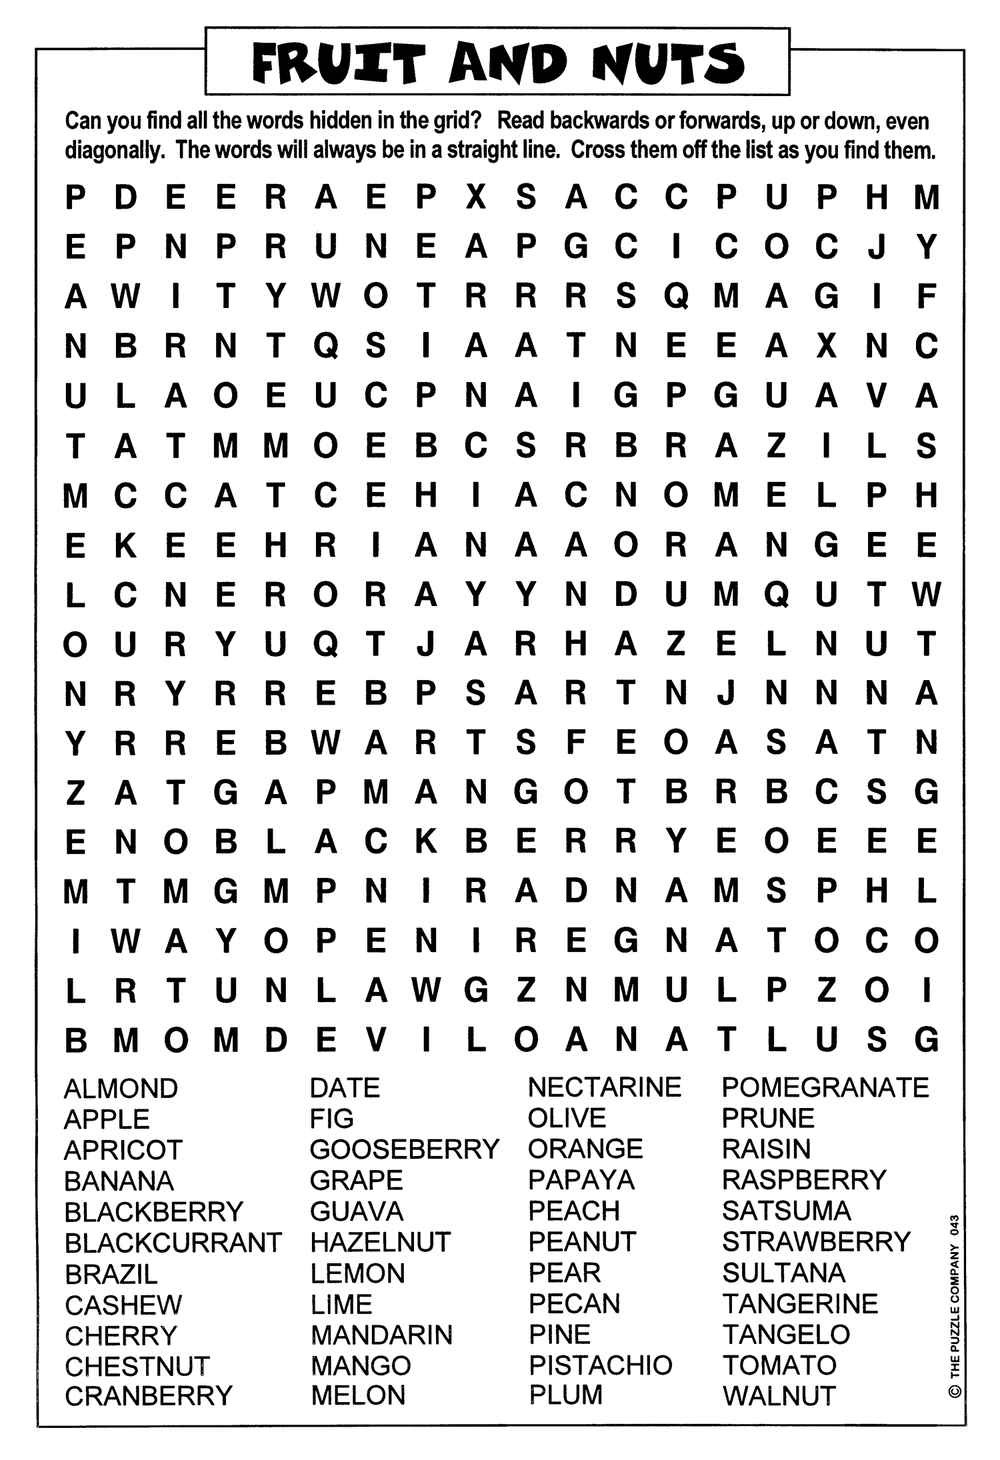 word-search-knight-features-content-worth-sharing